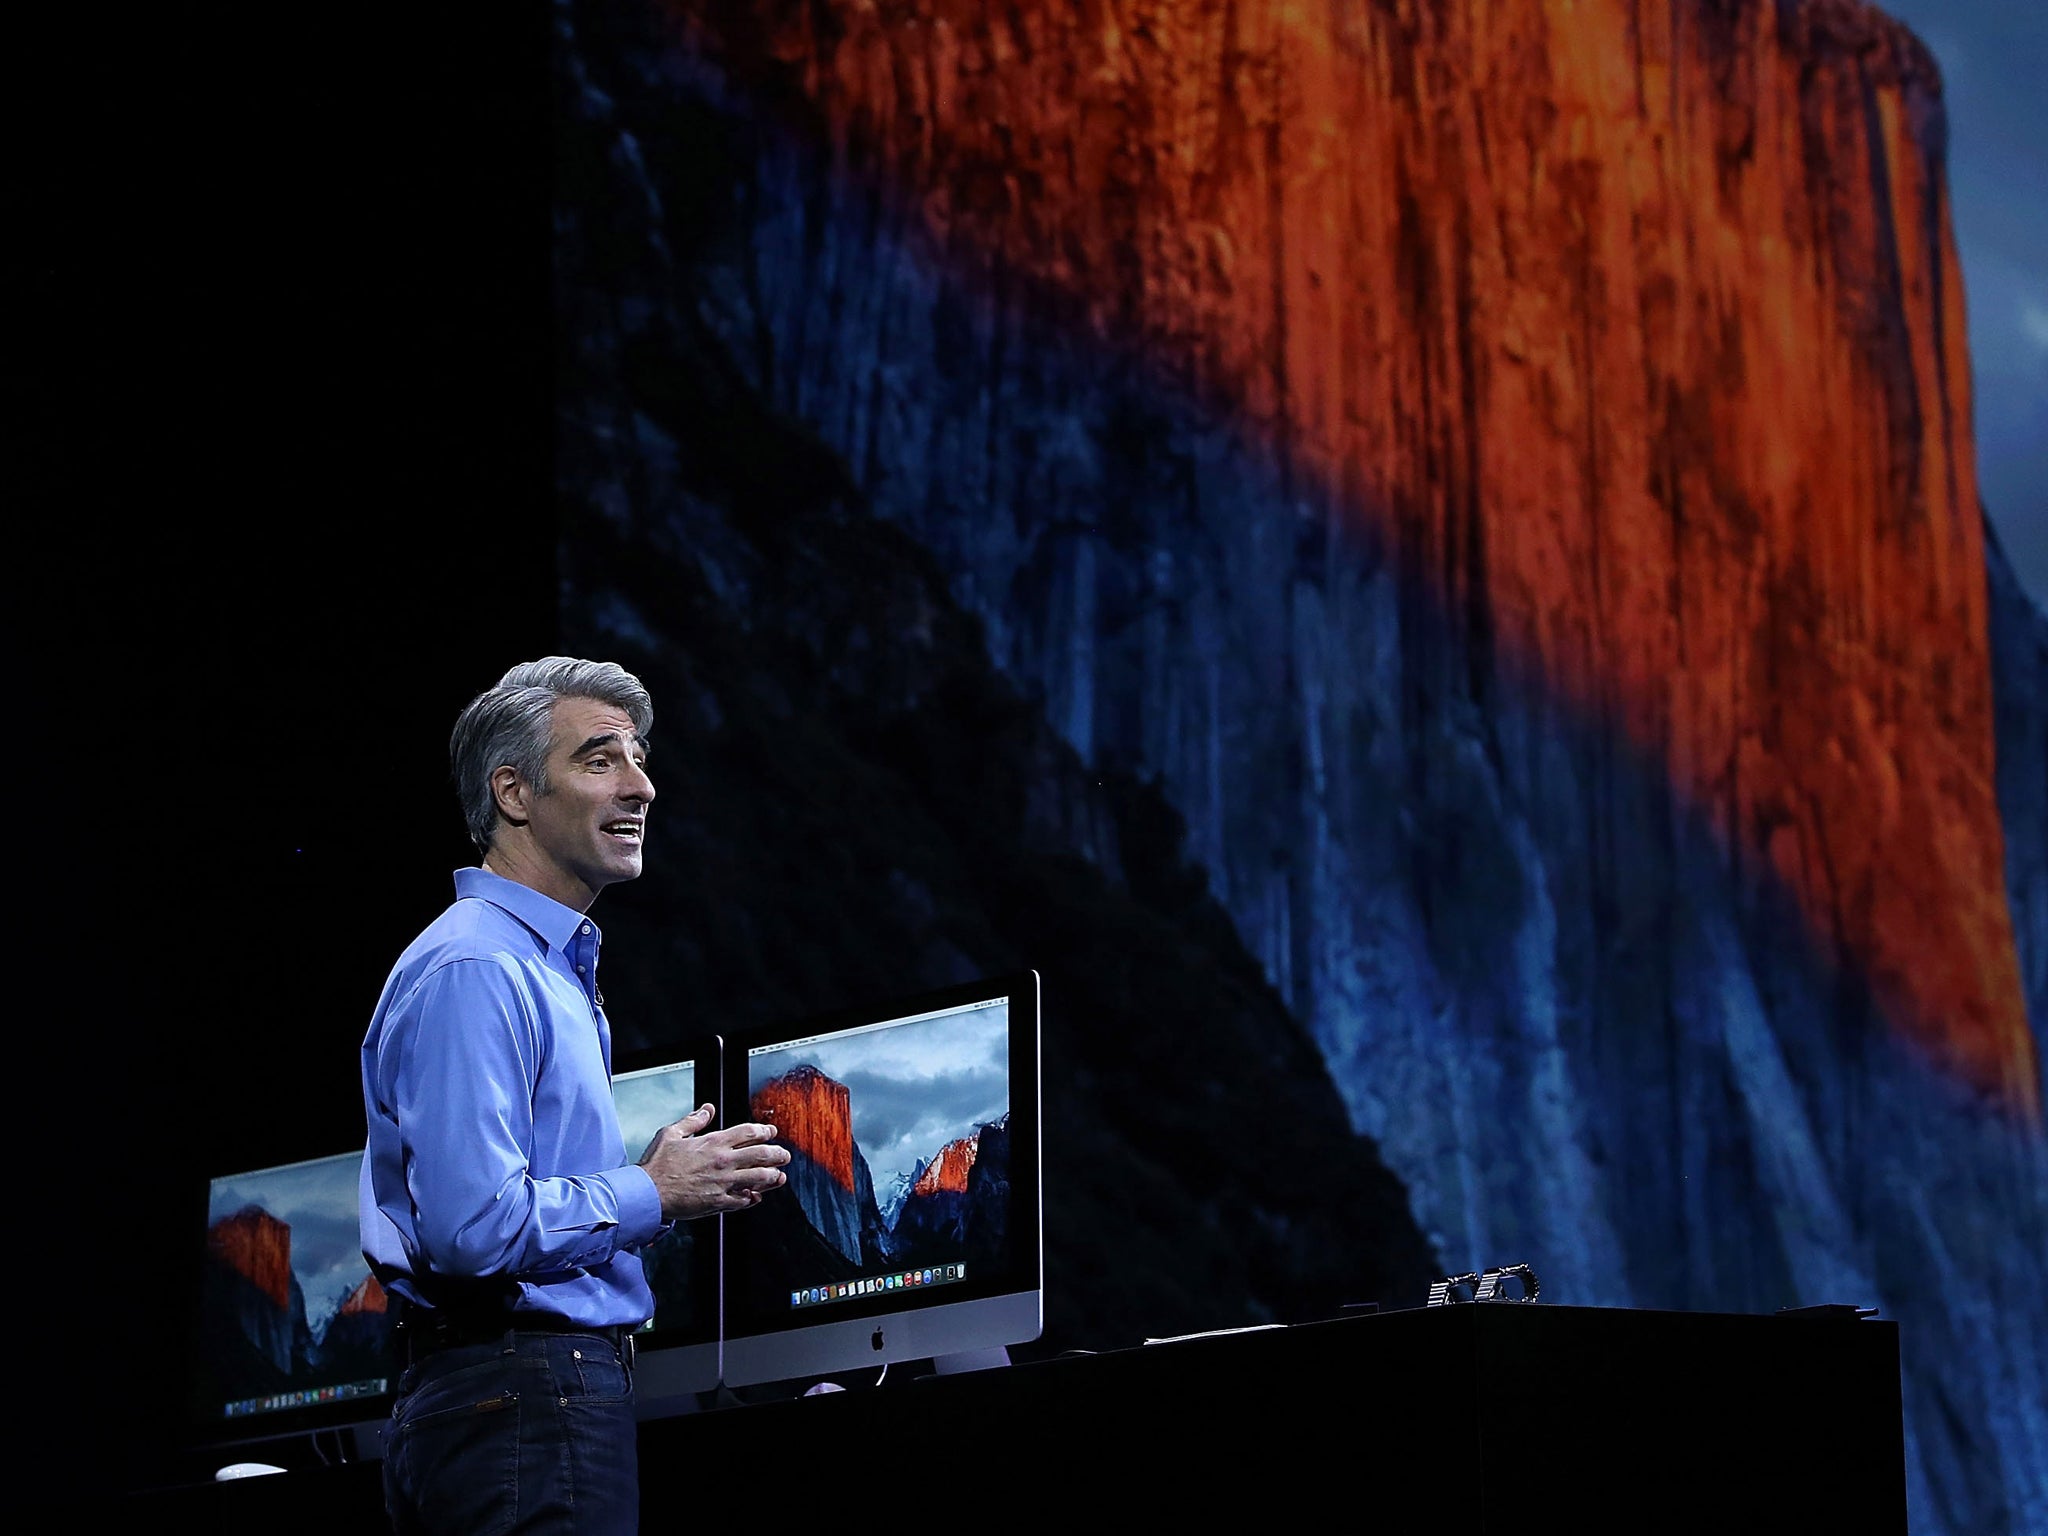 Apple's Craig Federighi, Apple senior vice president of Software Engineering, speaks about OS 10, El Capitan, during Apple WWDC on June 8, 2015 in San Francisco, California